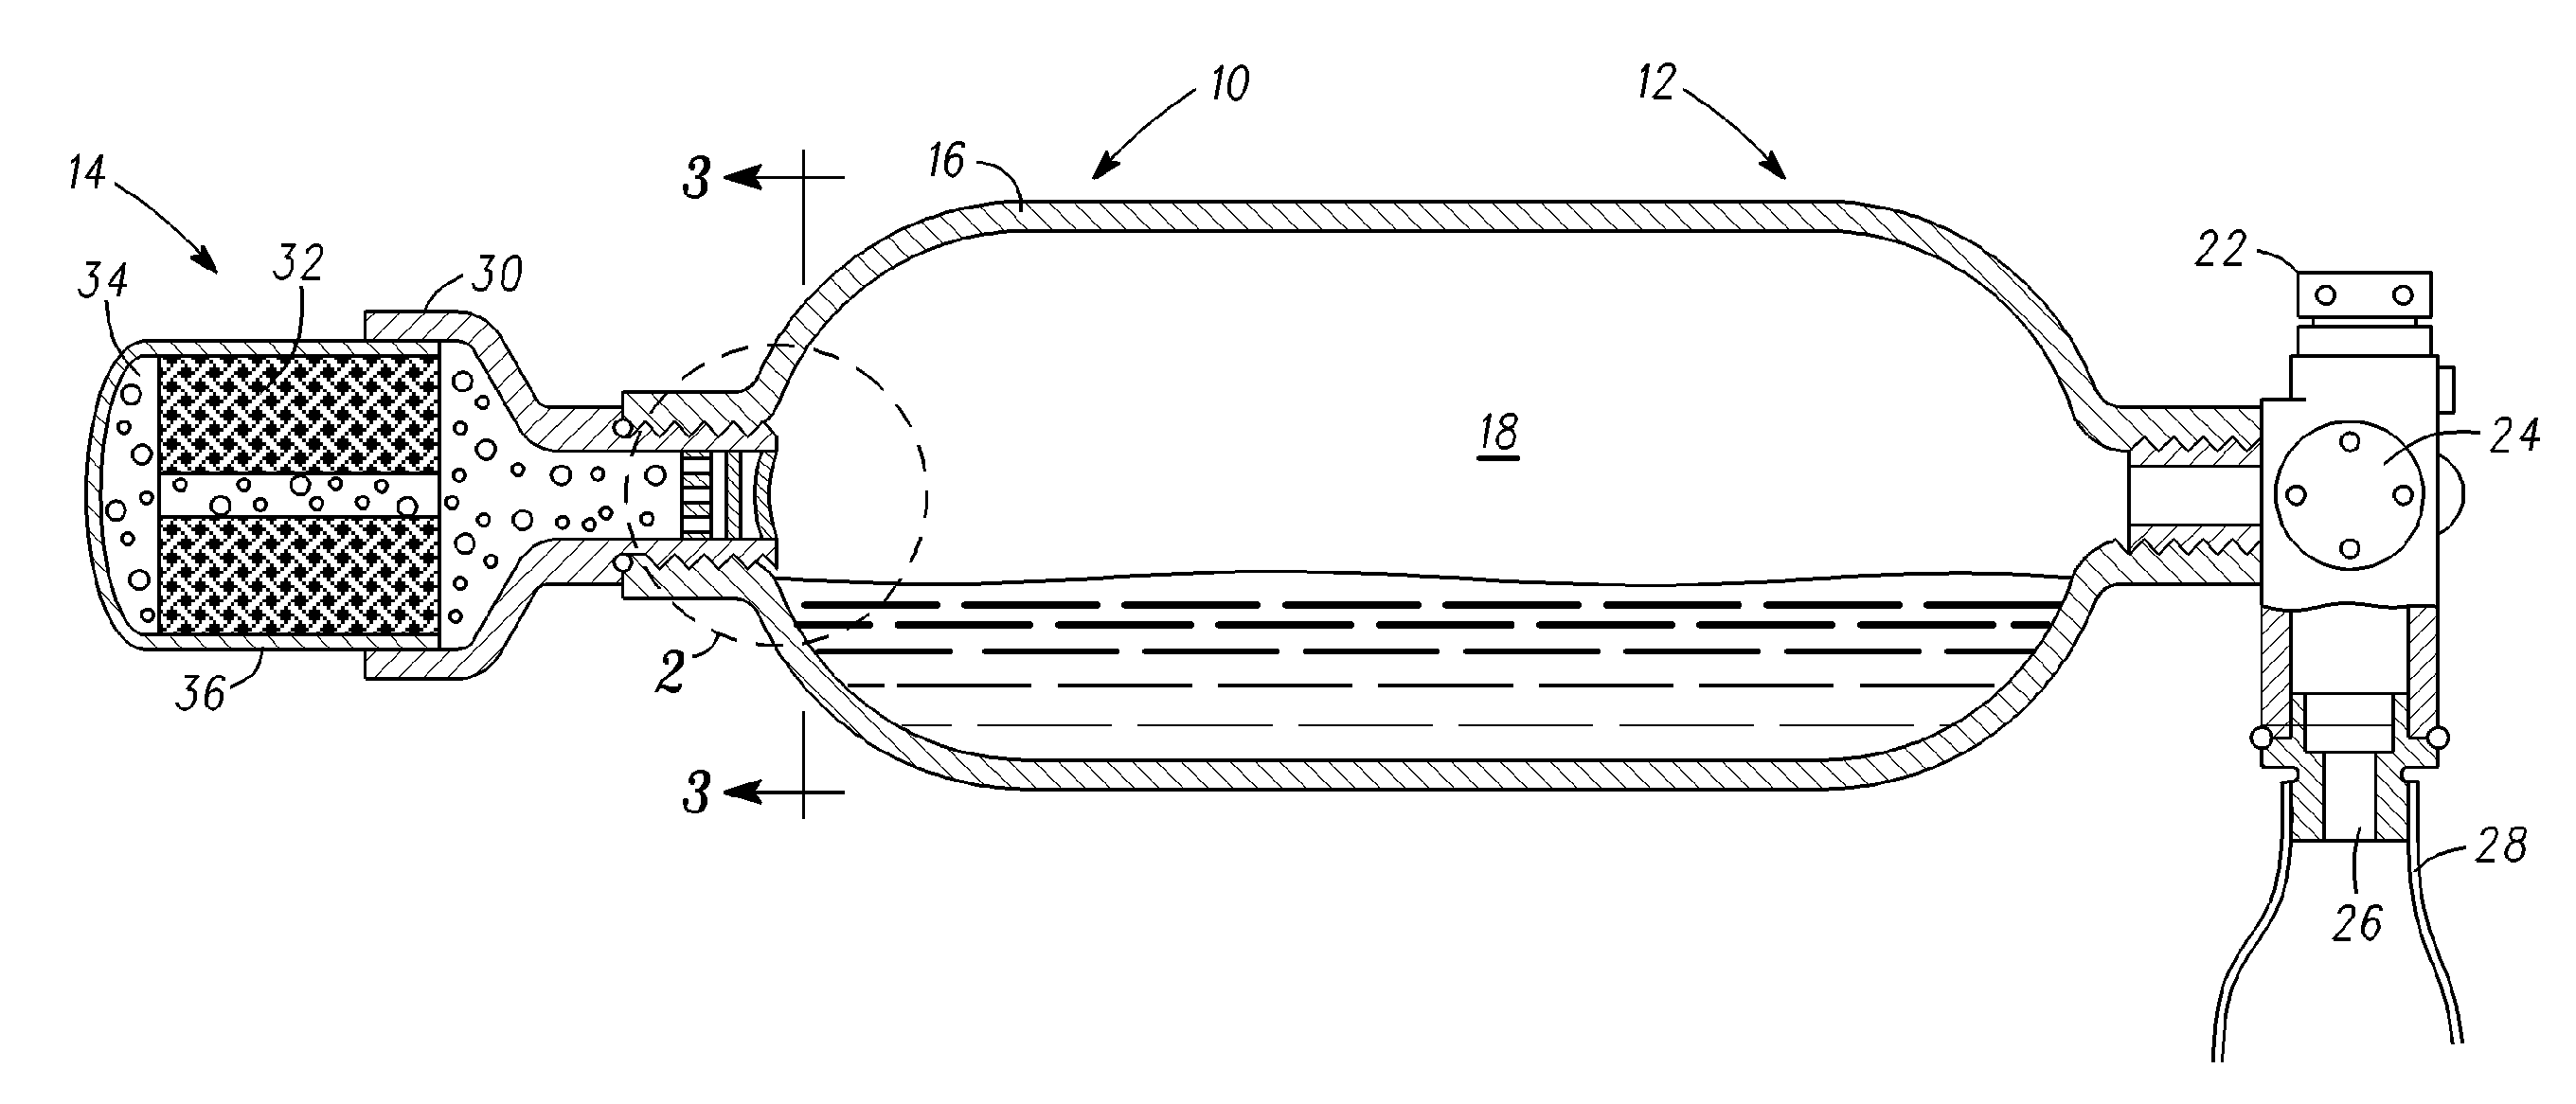 Hybrid inflator with temporary gas generator throttle